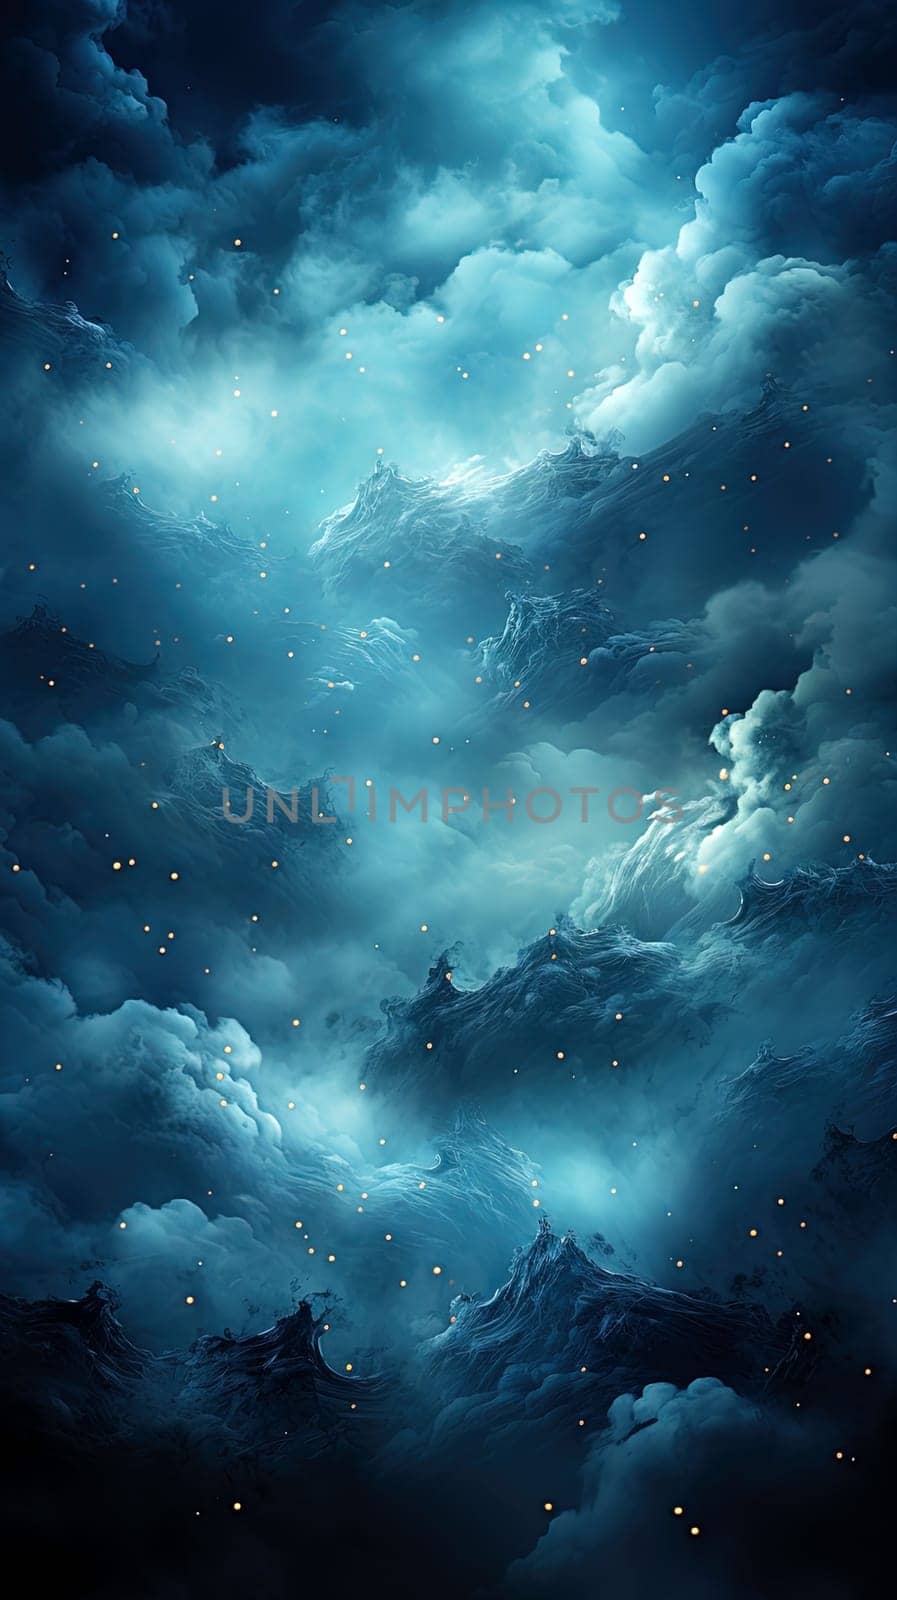 Fantasy Blue watercolor background illustration by Dustick